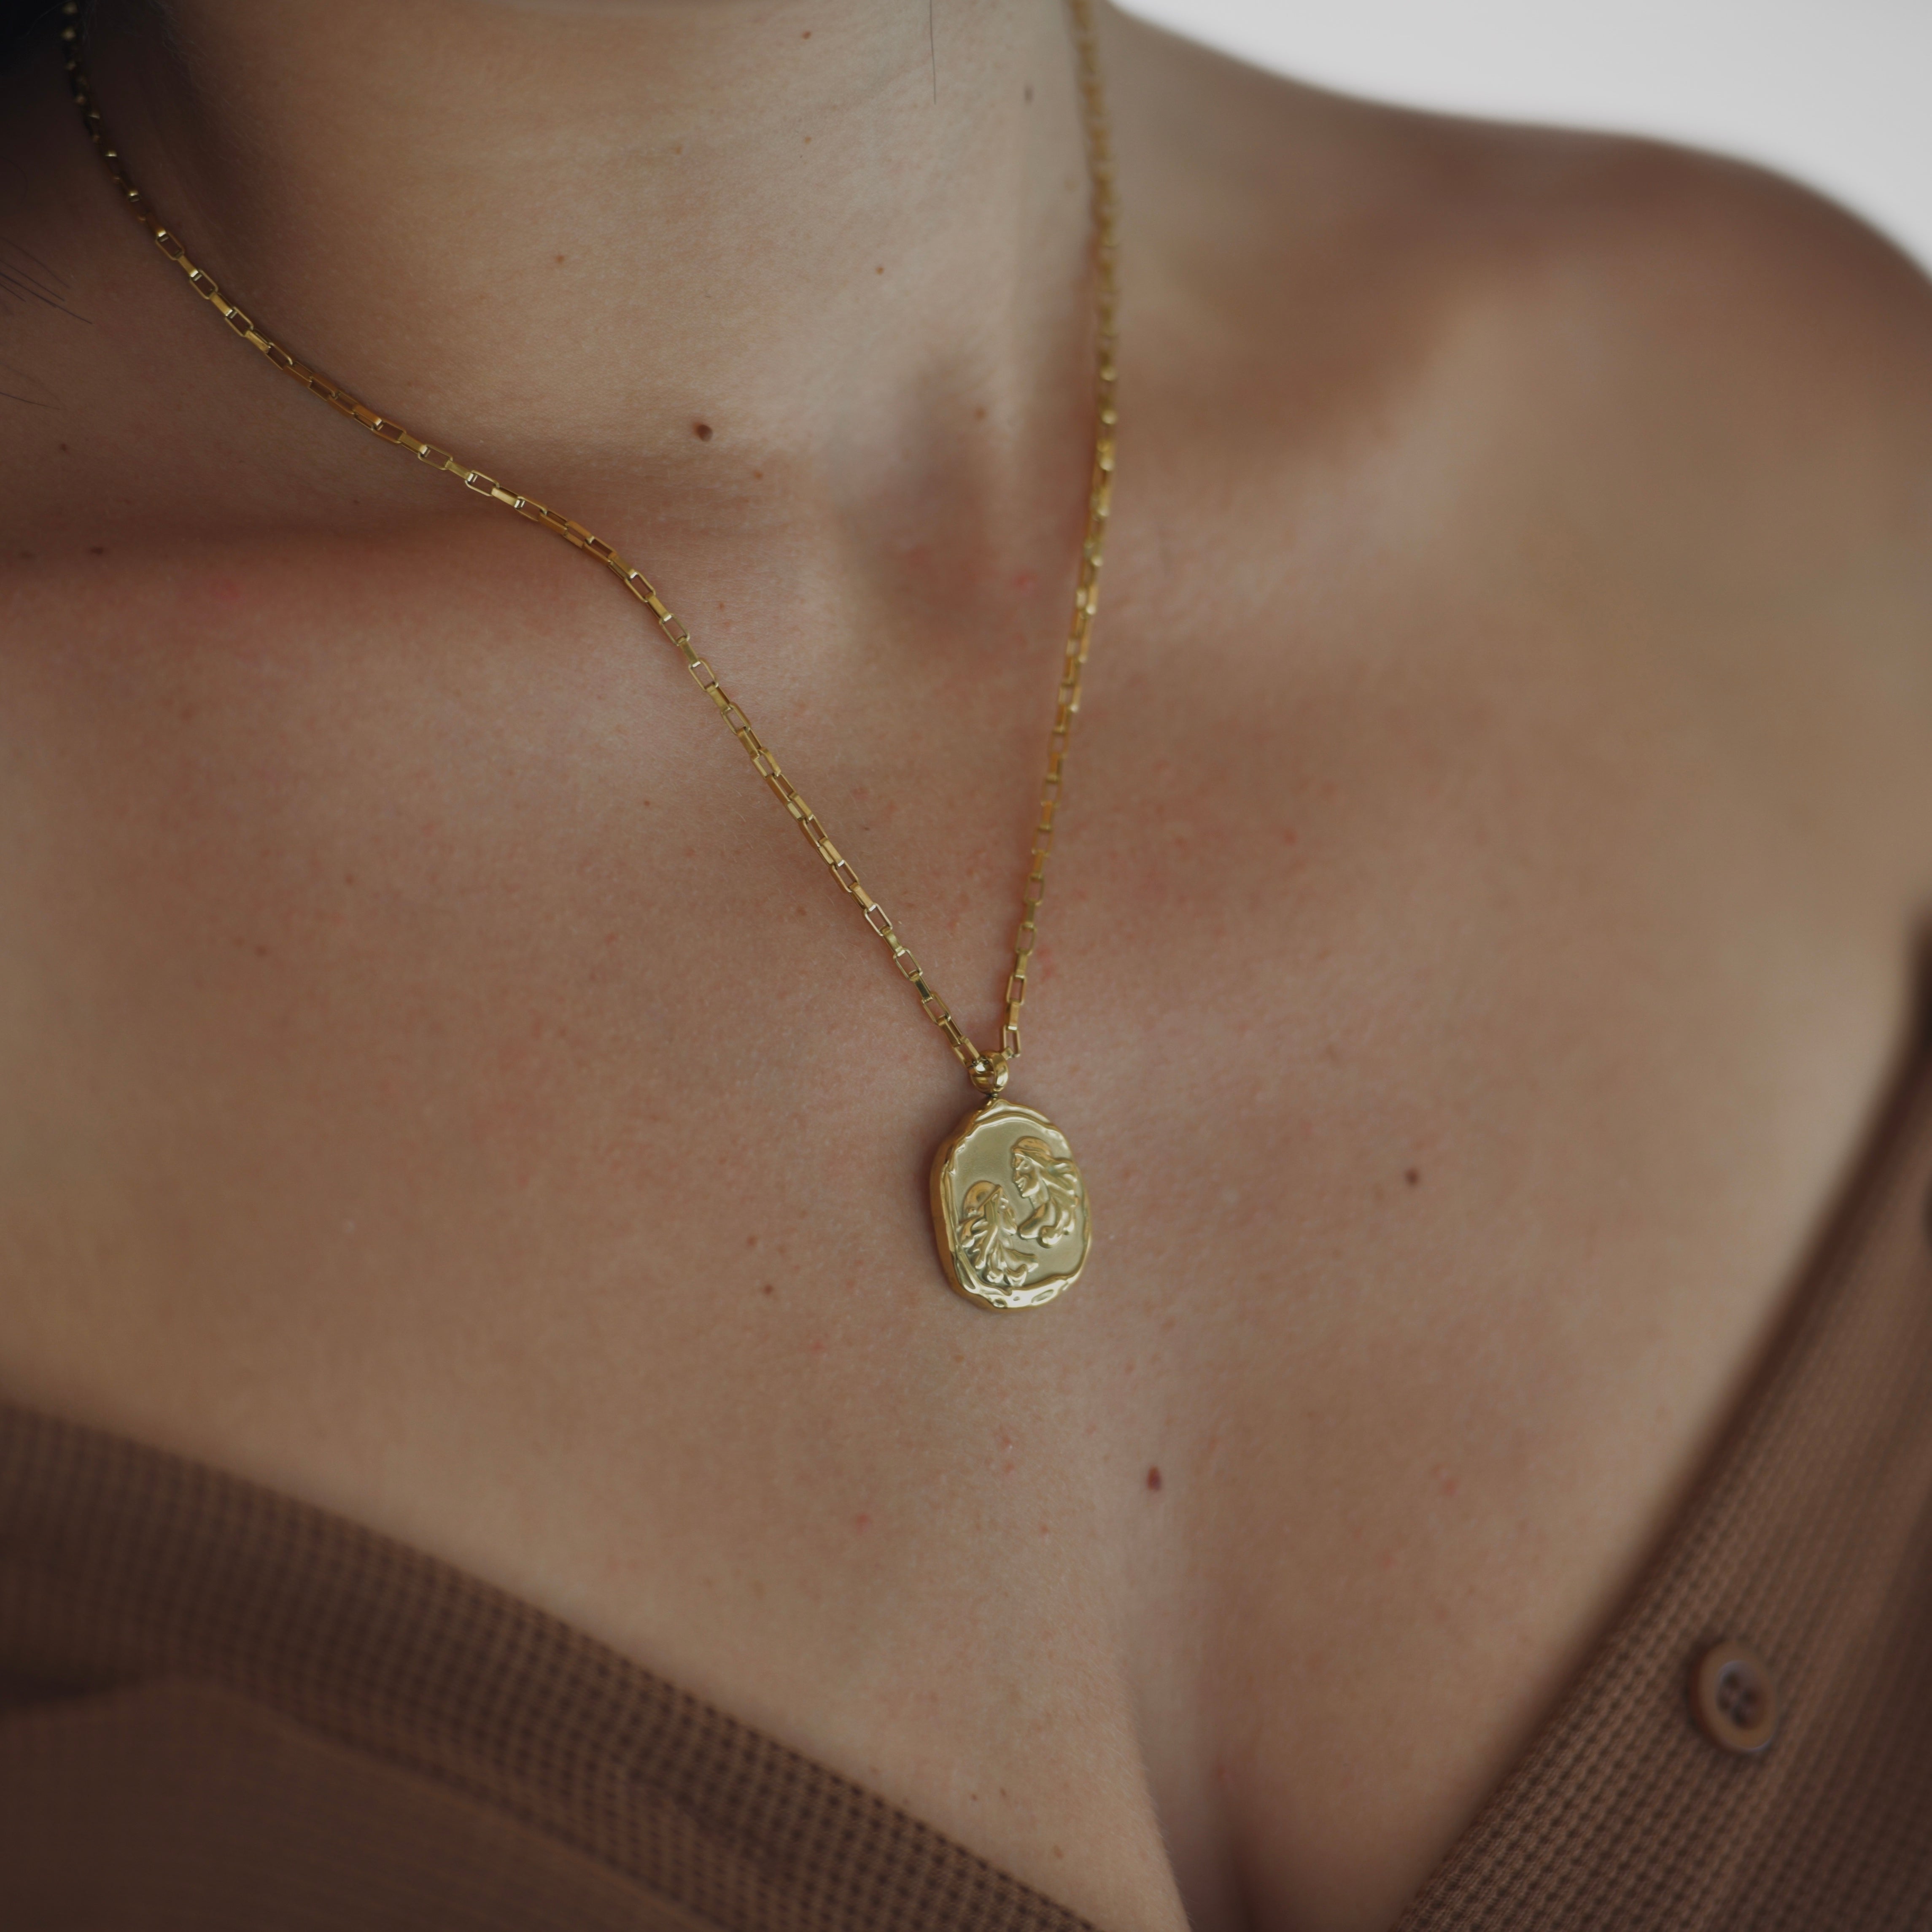 Gemini Zodiac Medallion Gold Necklace - Gold plated medallion irregular shape with two people rpresentin the twins - geminis on it. Gold chain necklace.